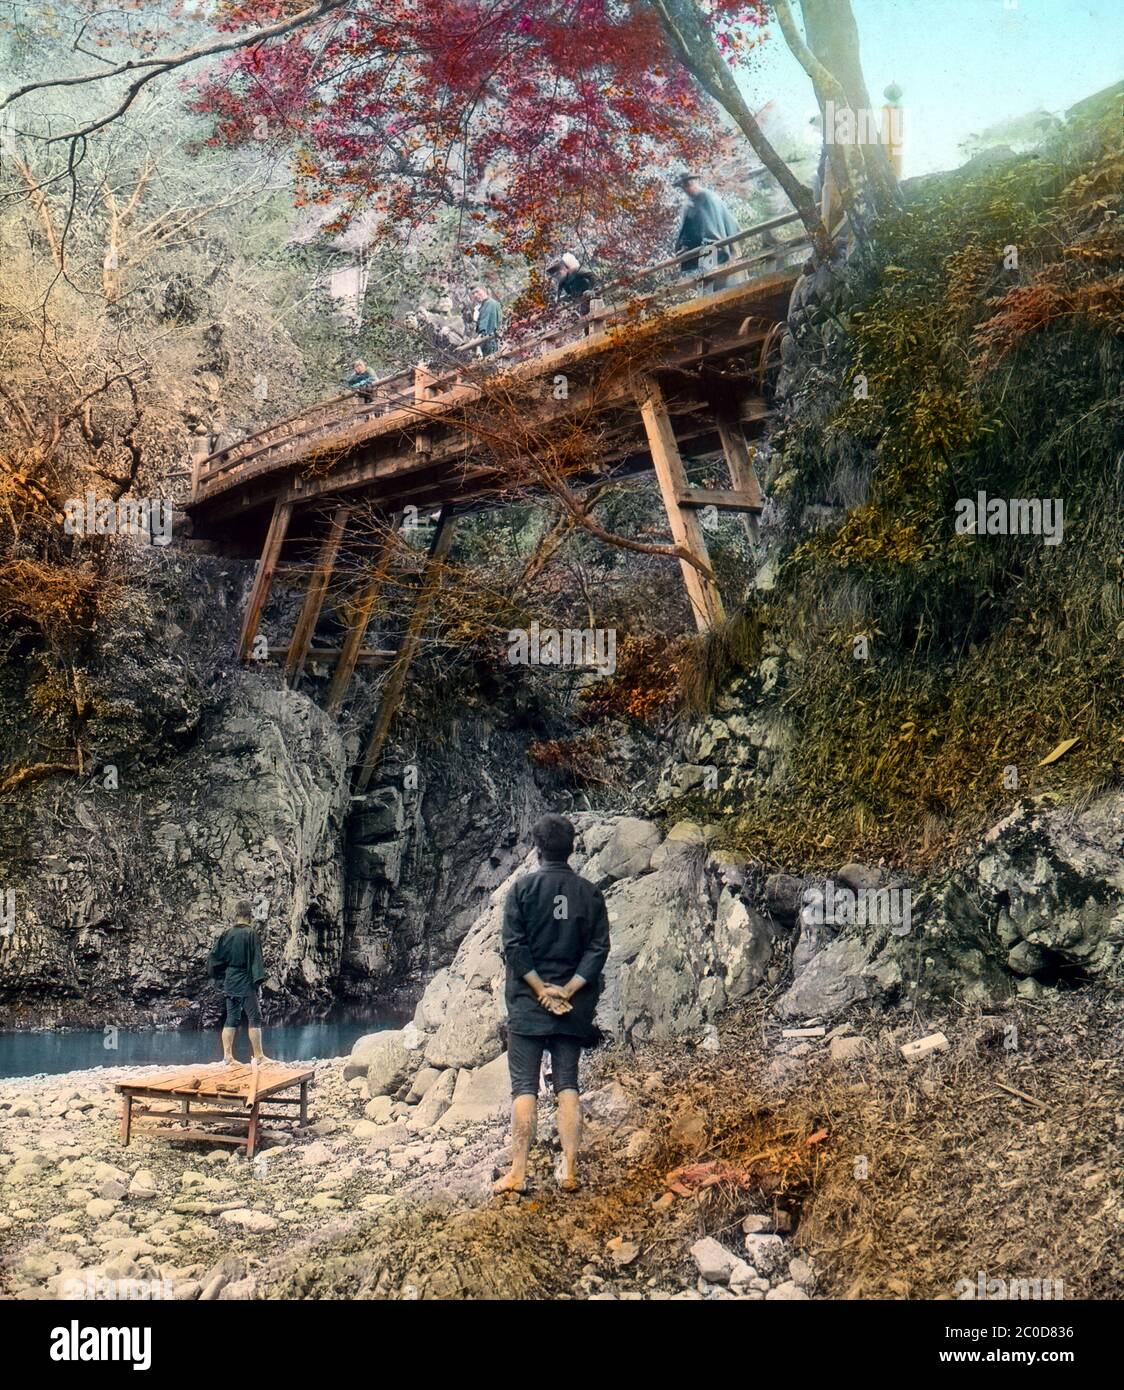 [ 1900s Japan - Kyoto in Autumn ] — Visitors enjoy the autumn colors of Japanese maple trees at Takao ((高雄), one of Kyoto’s three most famous mountain ridges.  20th century vintage glass slide. Stock Photo